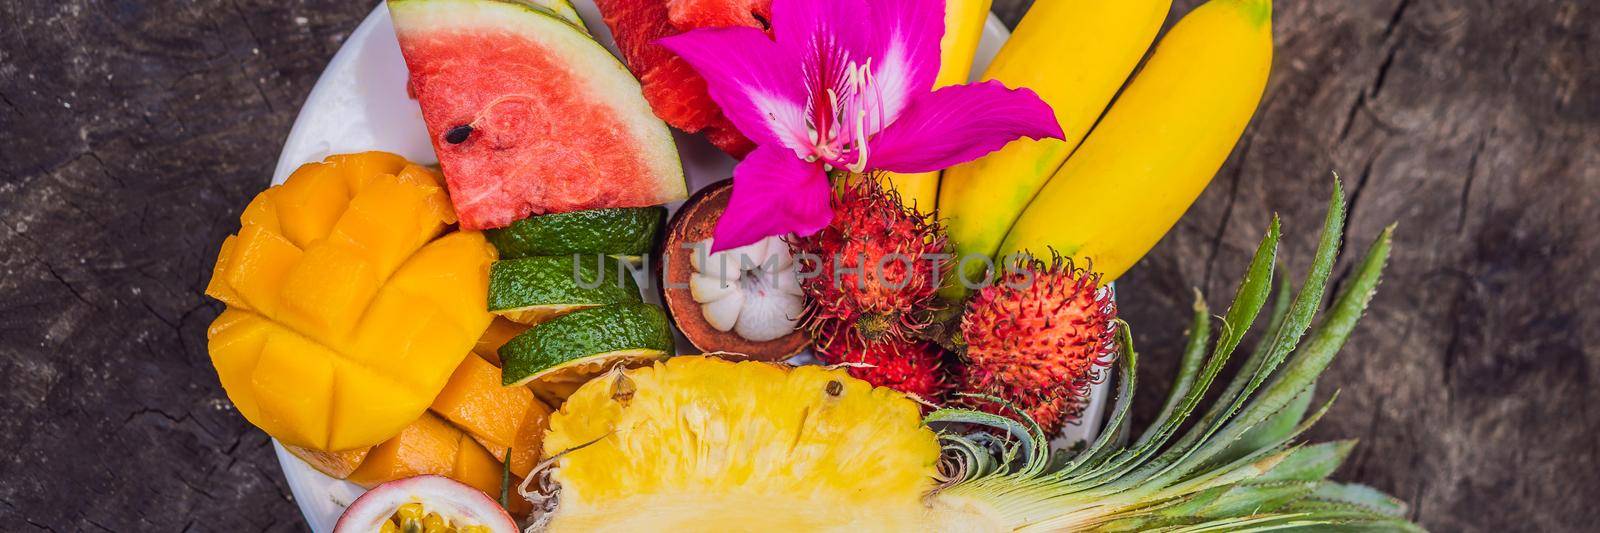 Colorful tropical fruits on big plate. On rustic wooden background. Top view BANNER, LONG FORMAT by galitskaya